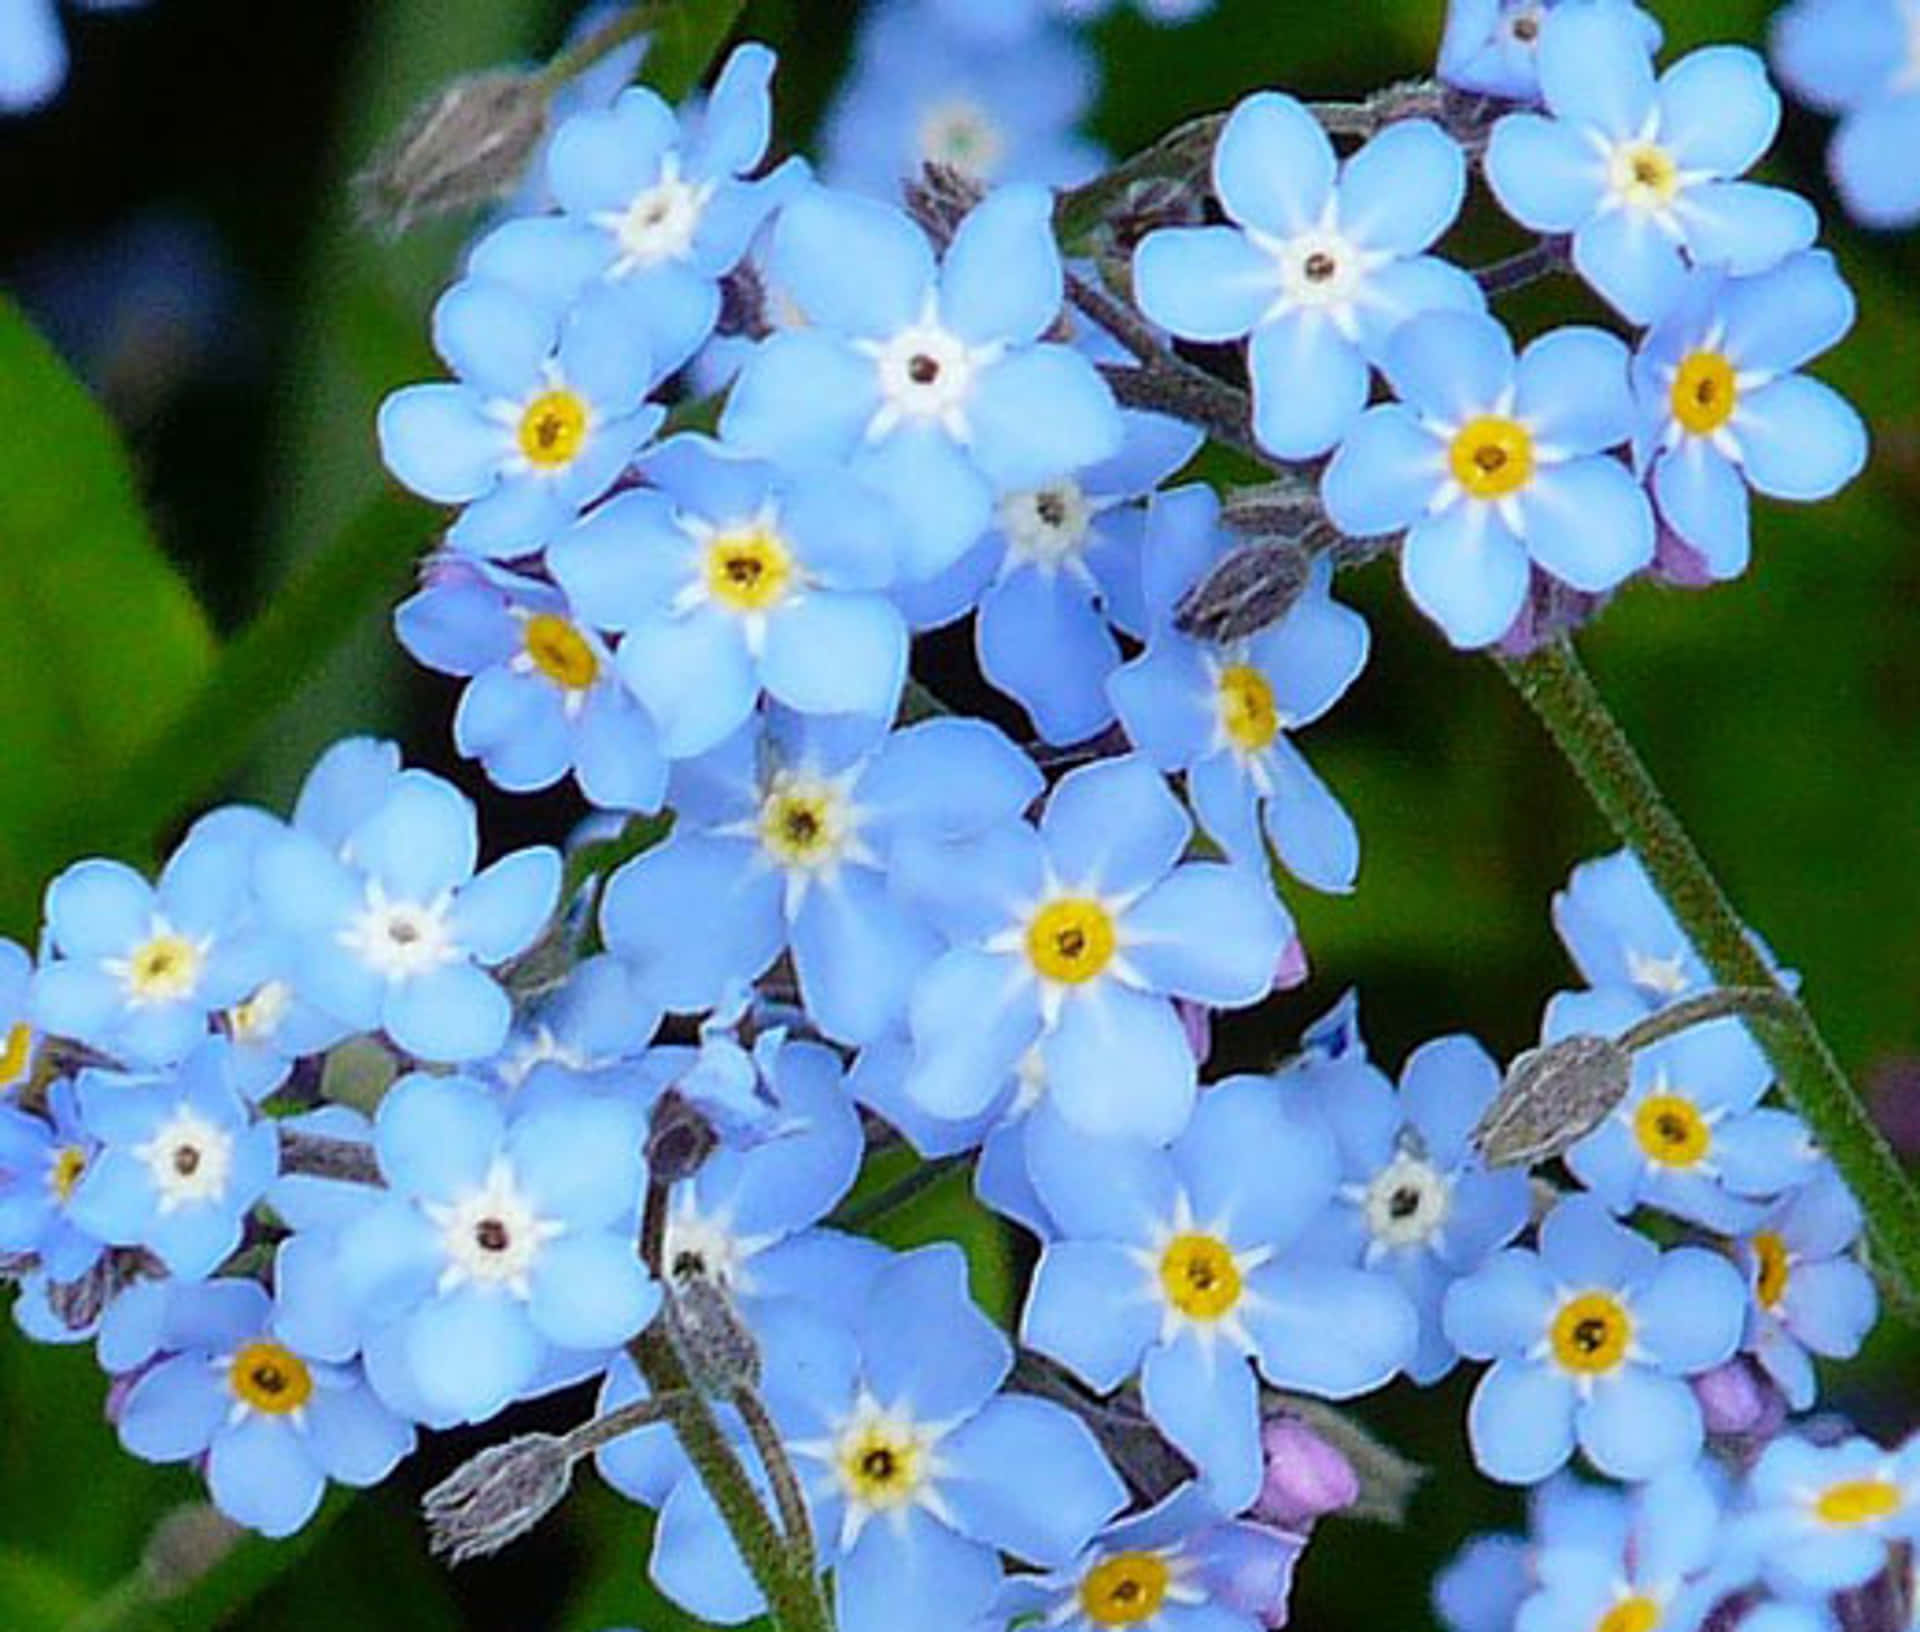 A beautiful Forget Me Not flower in full bloom